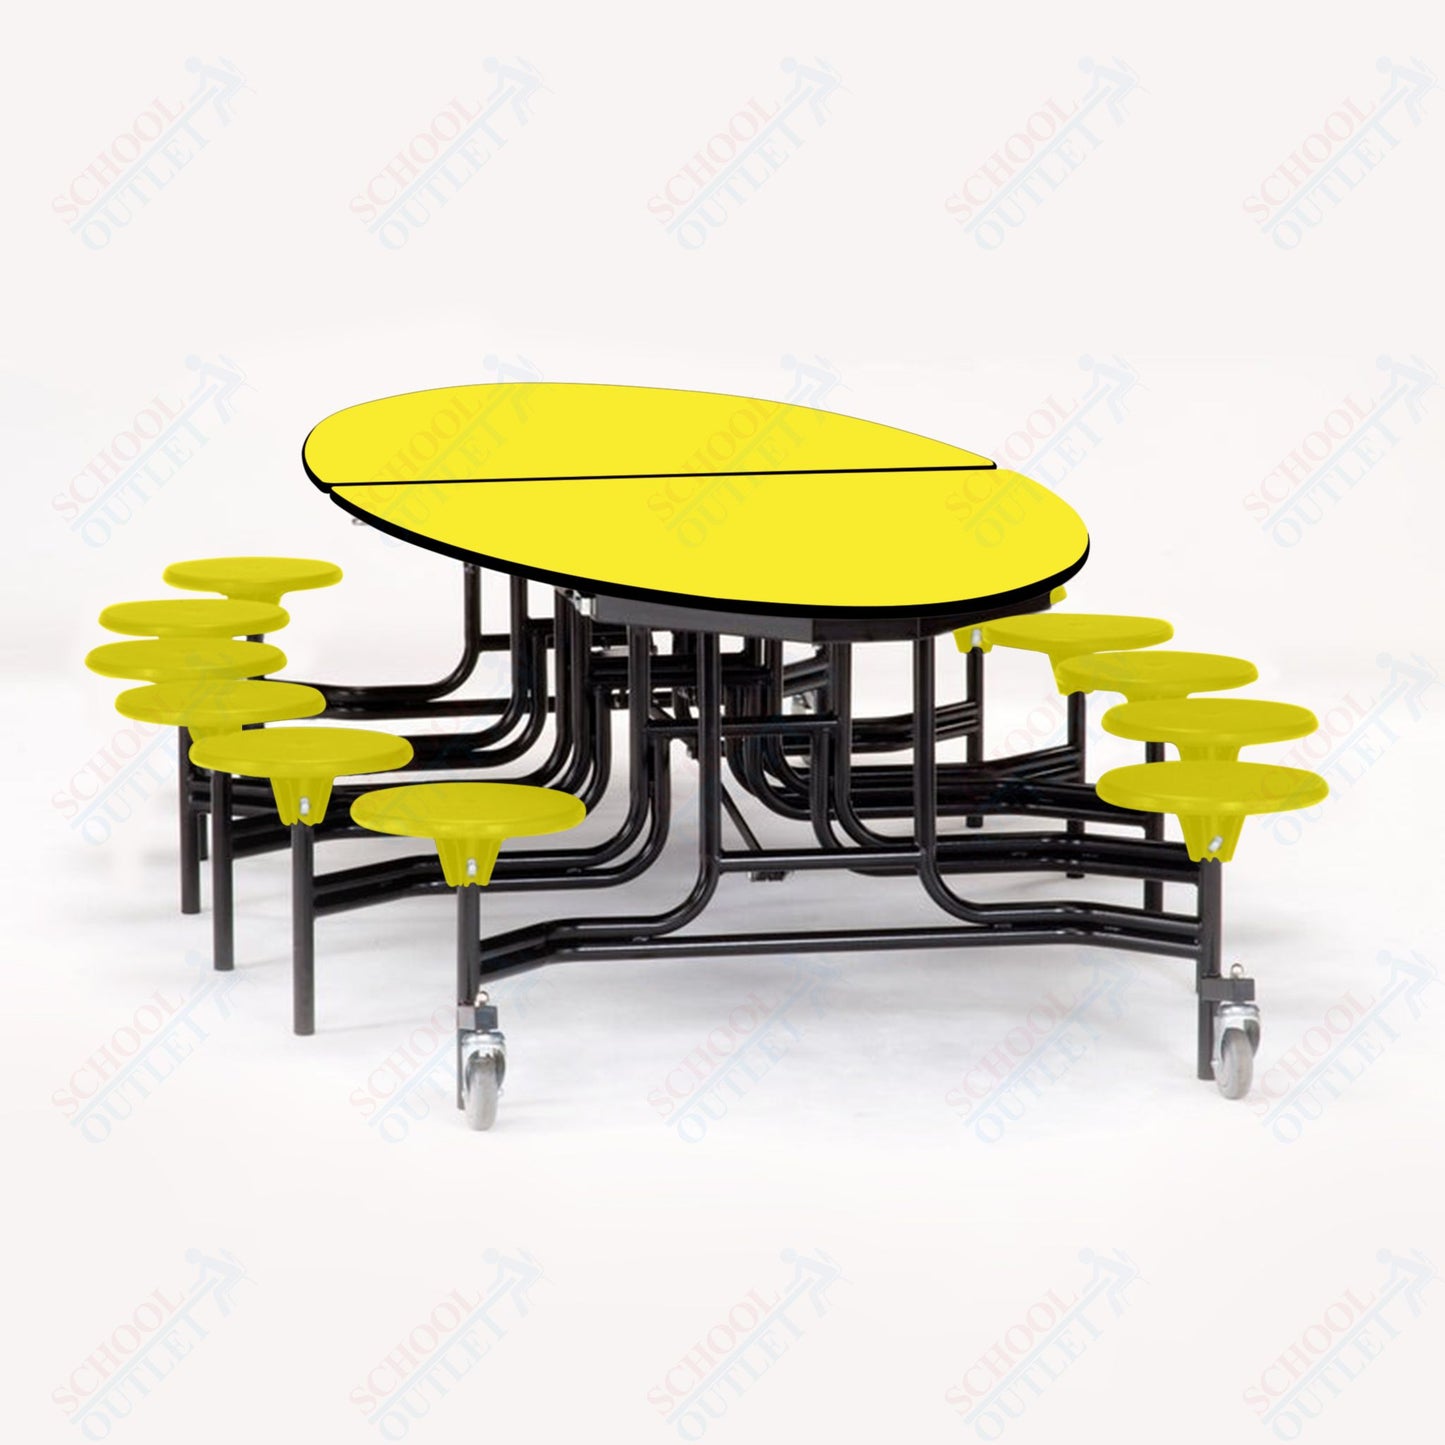 NPS 10' Elliptical Mobile Cafeteria Table - 12 Stools - Plywood Core - Protect Edge - Chrome Frame